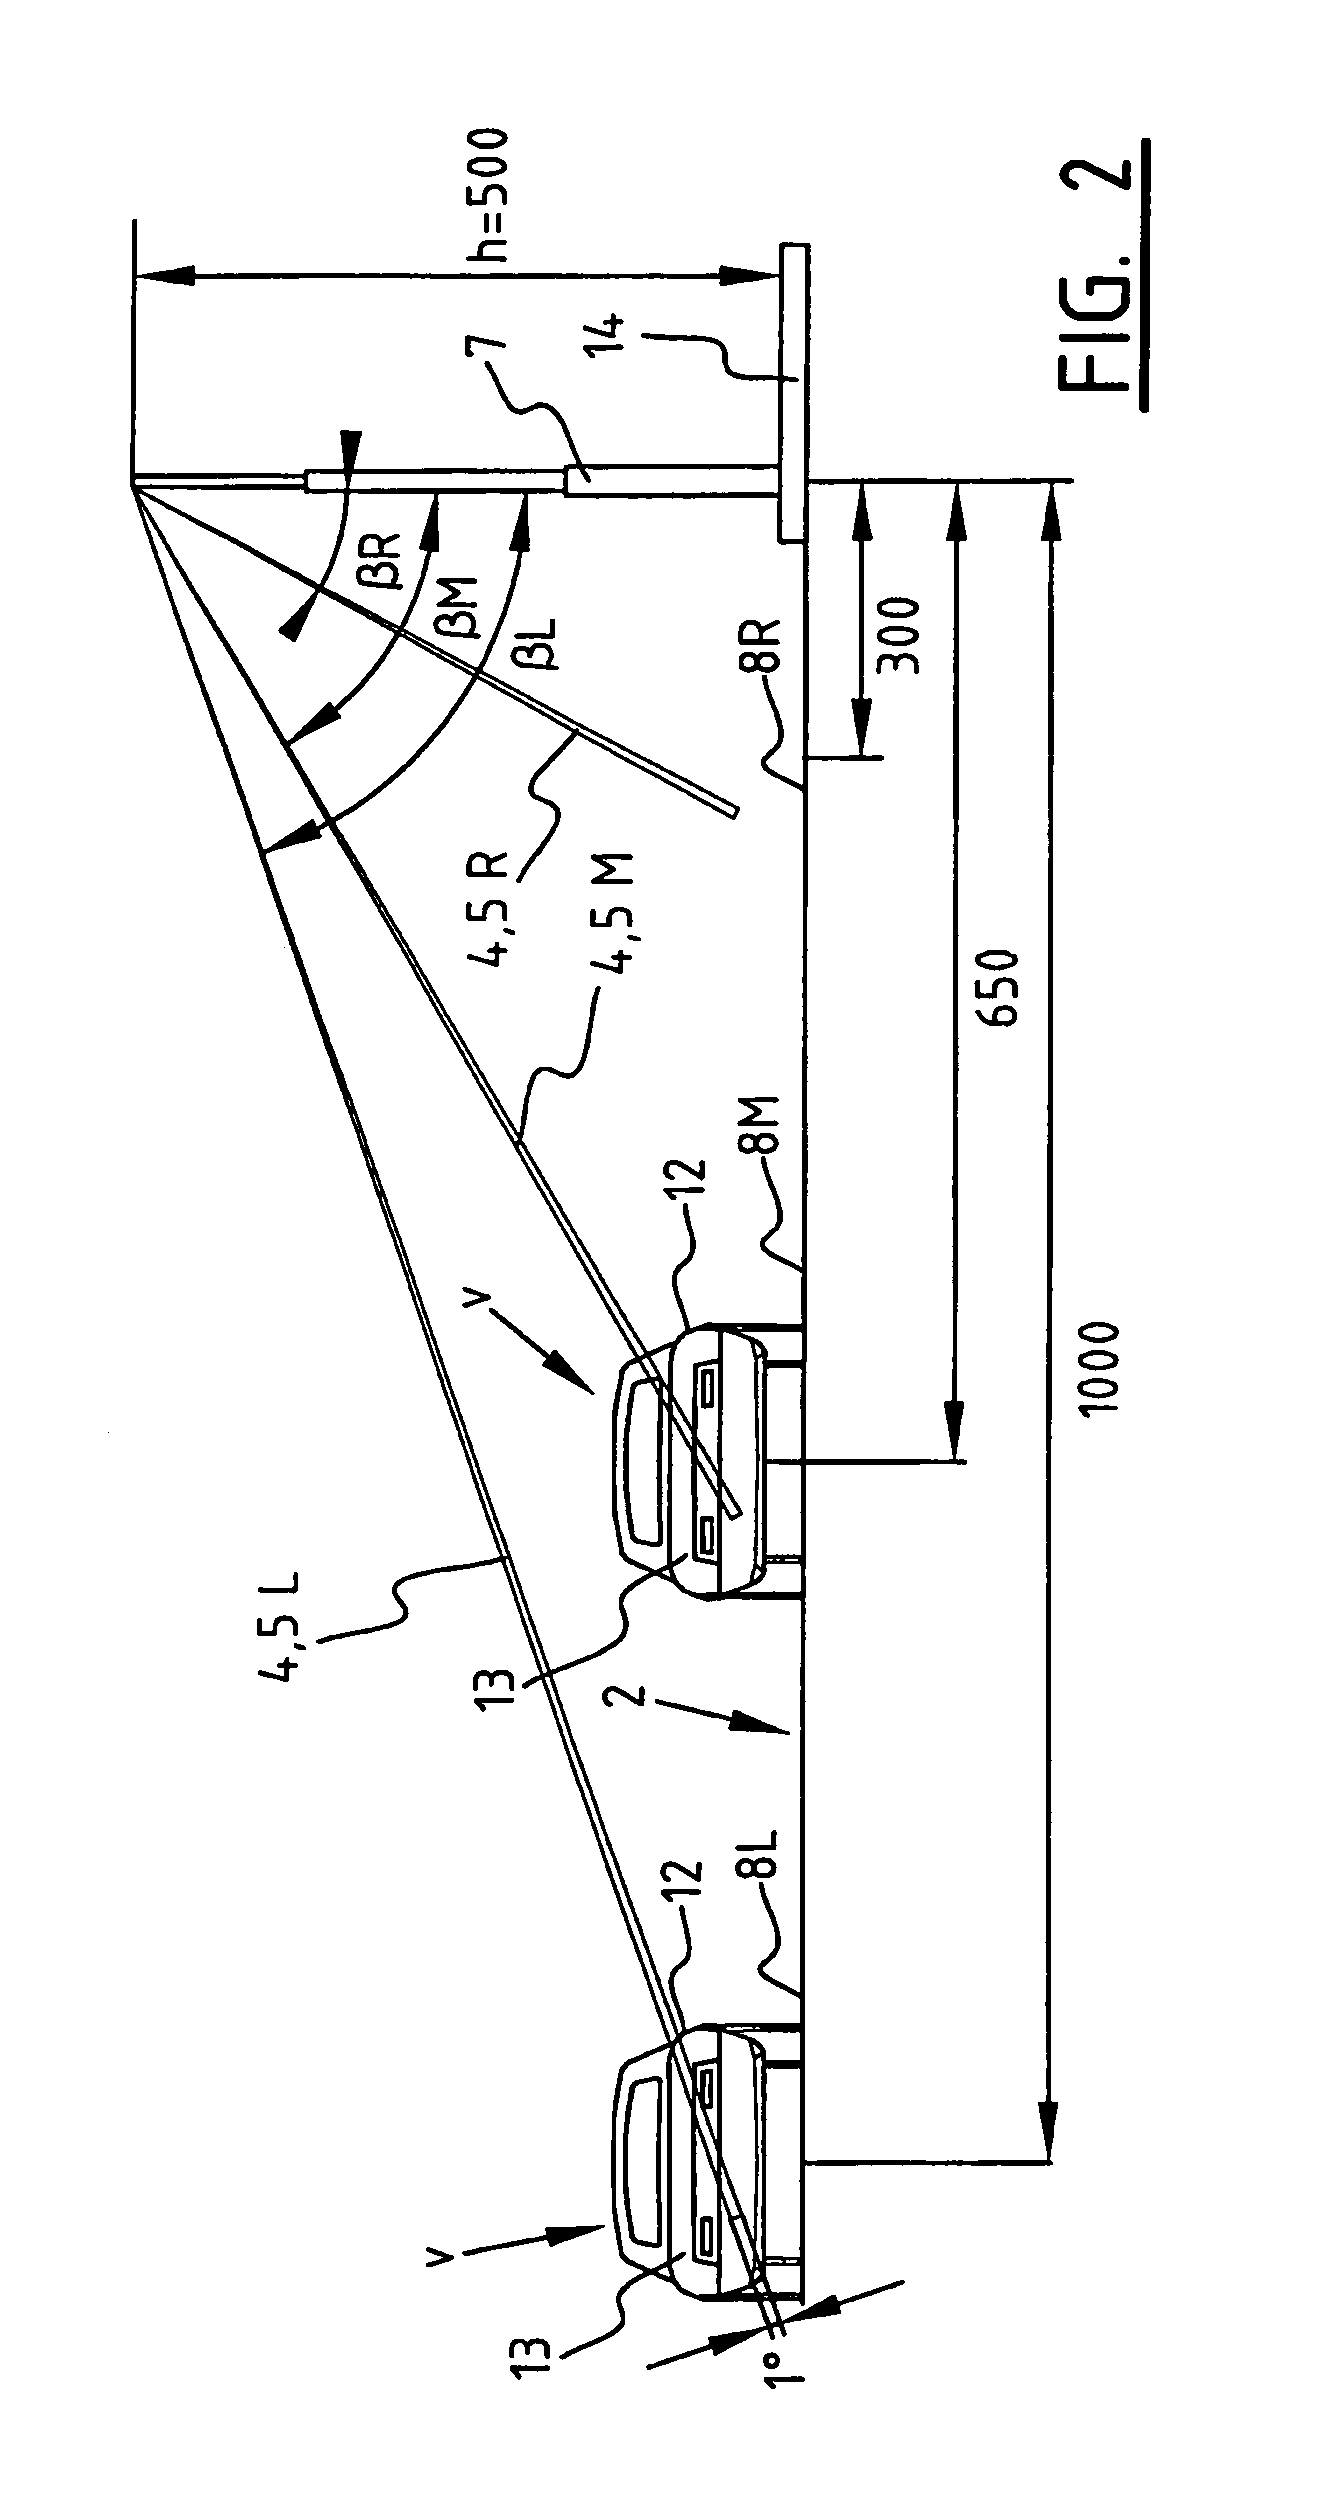 Method and system for detecting with laser the passage by a vehicle of a point for monitoring on a road